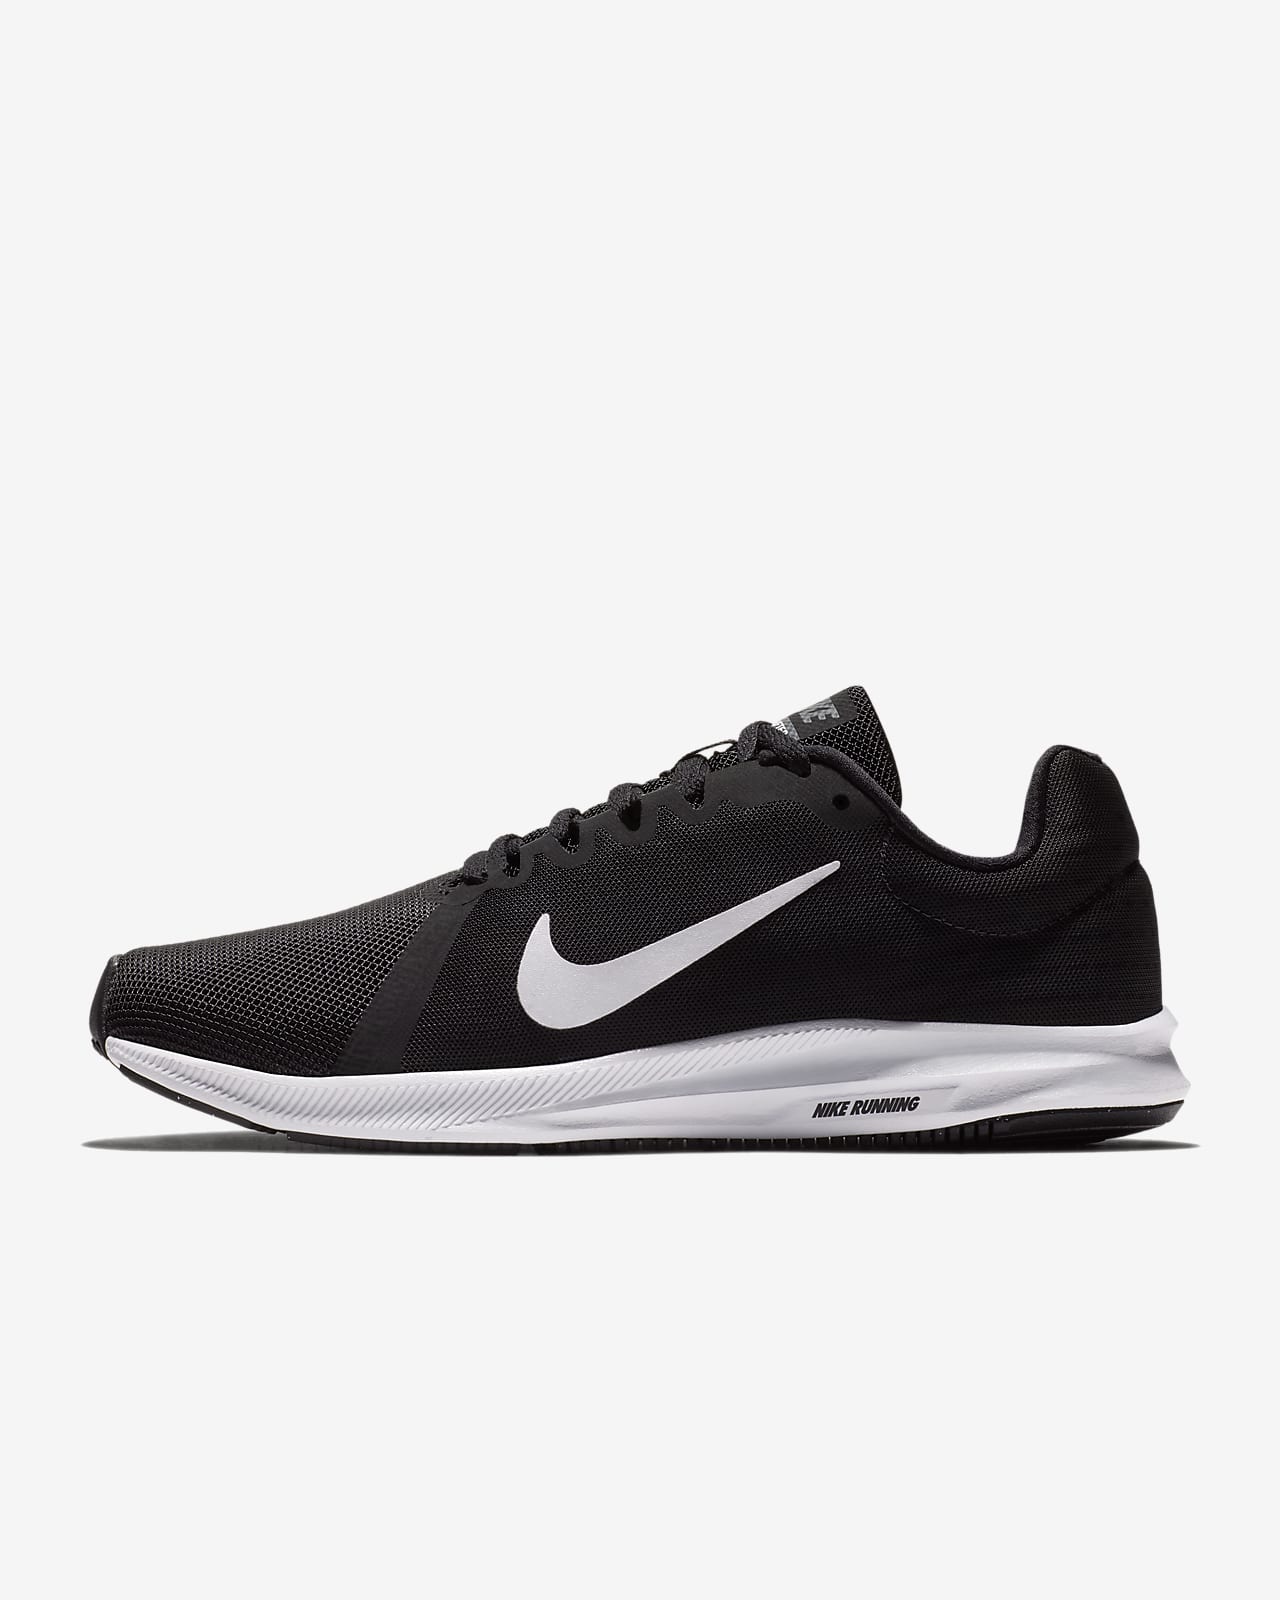 nike downshifter 8 womens reviews online -